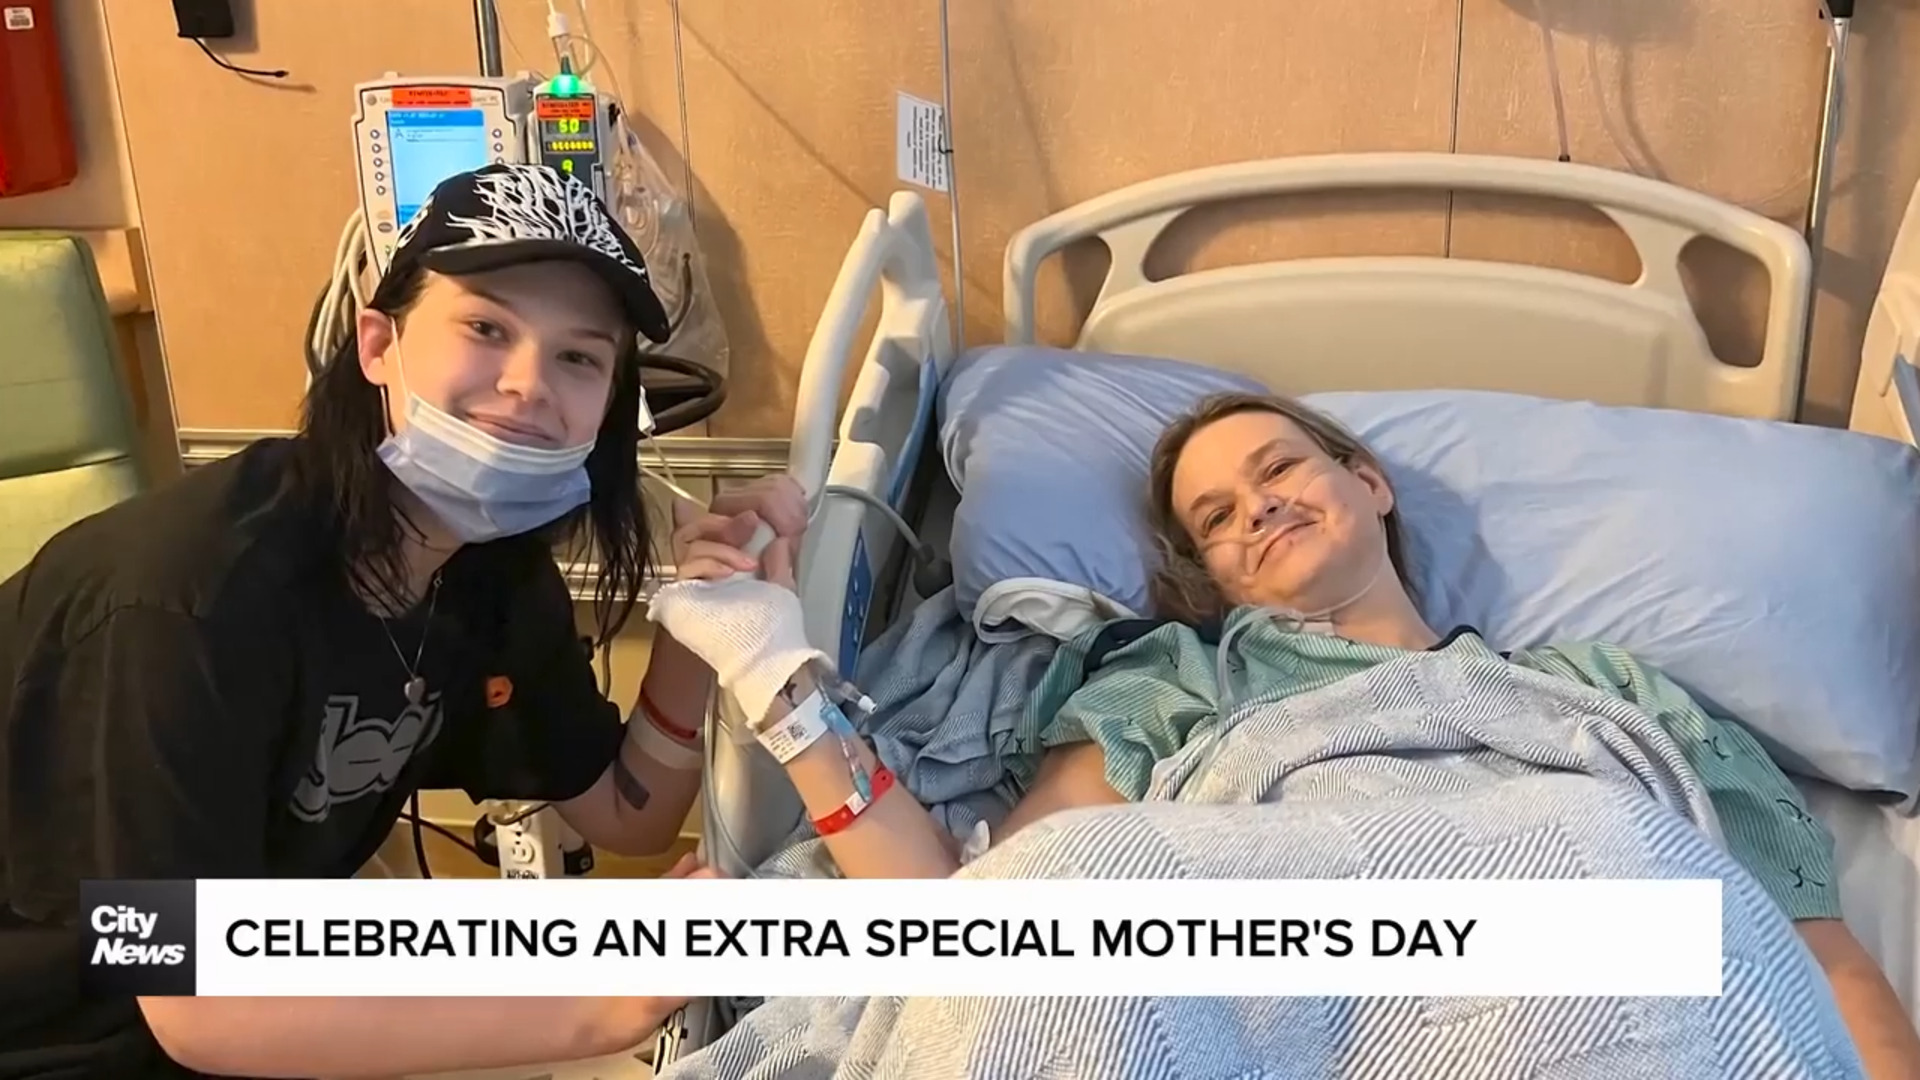 Celebrating an extra special Mother's Day